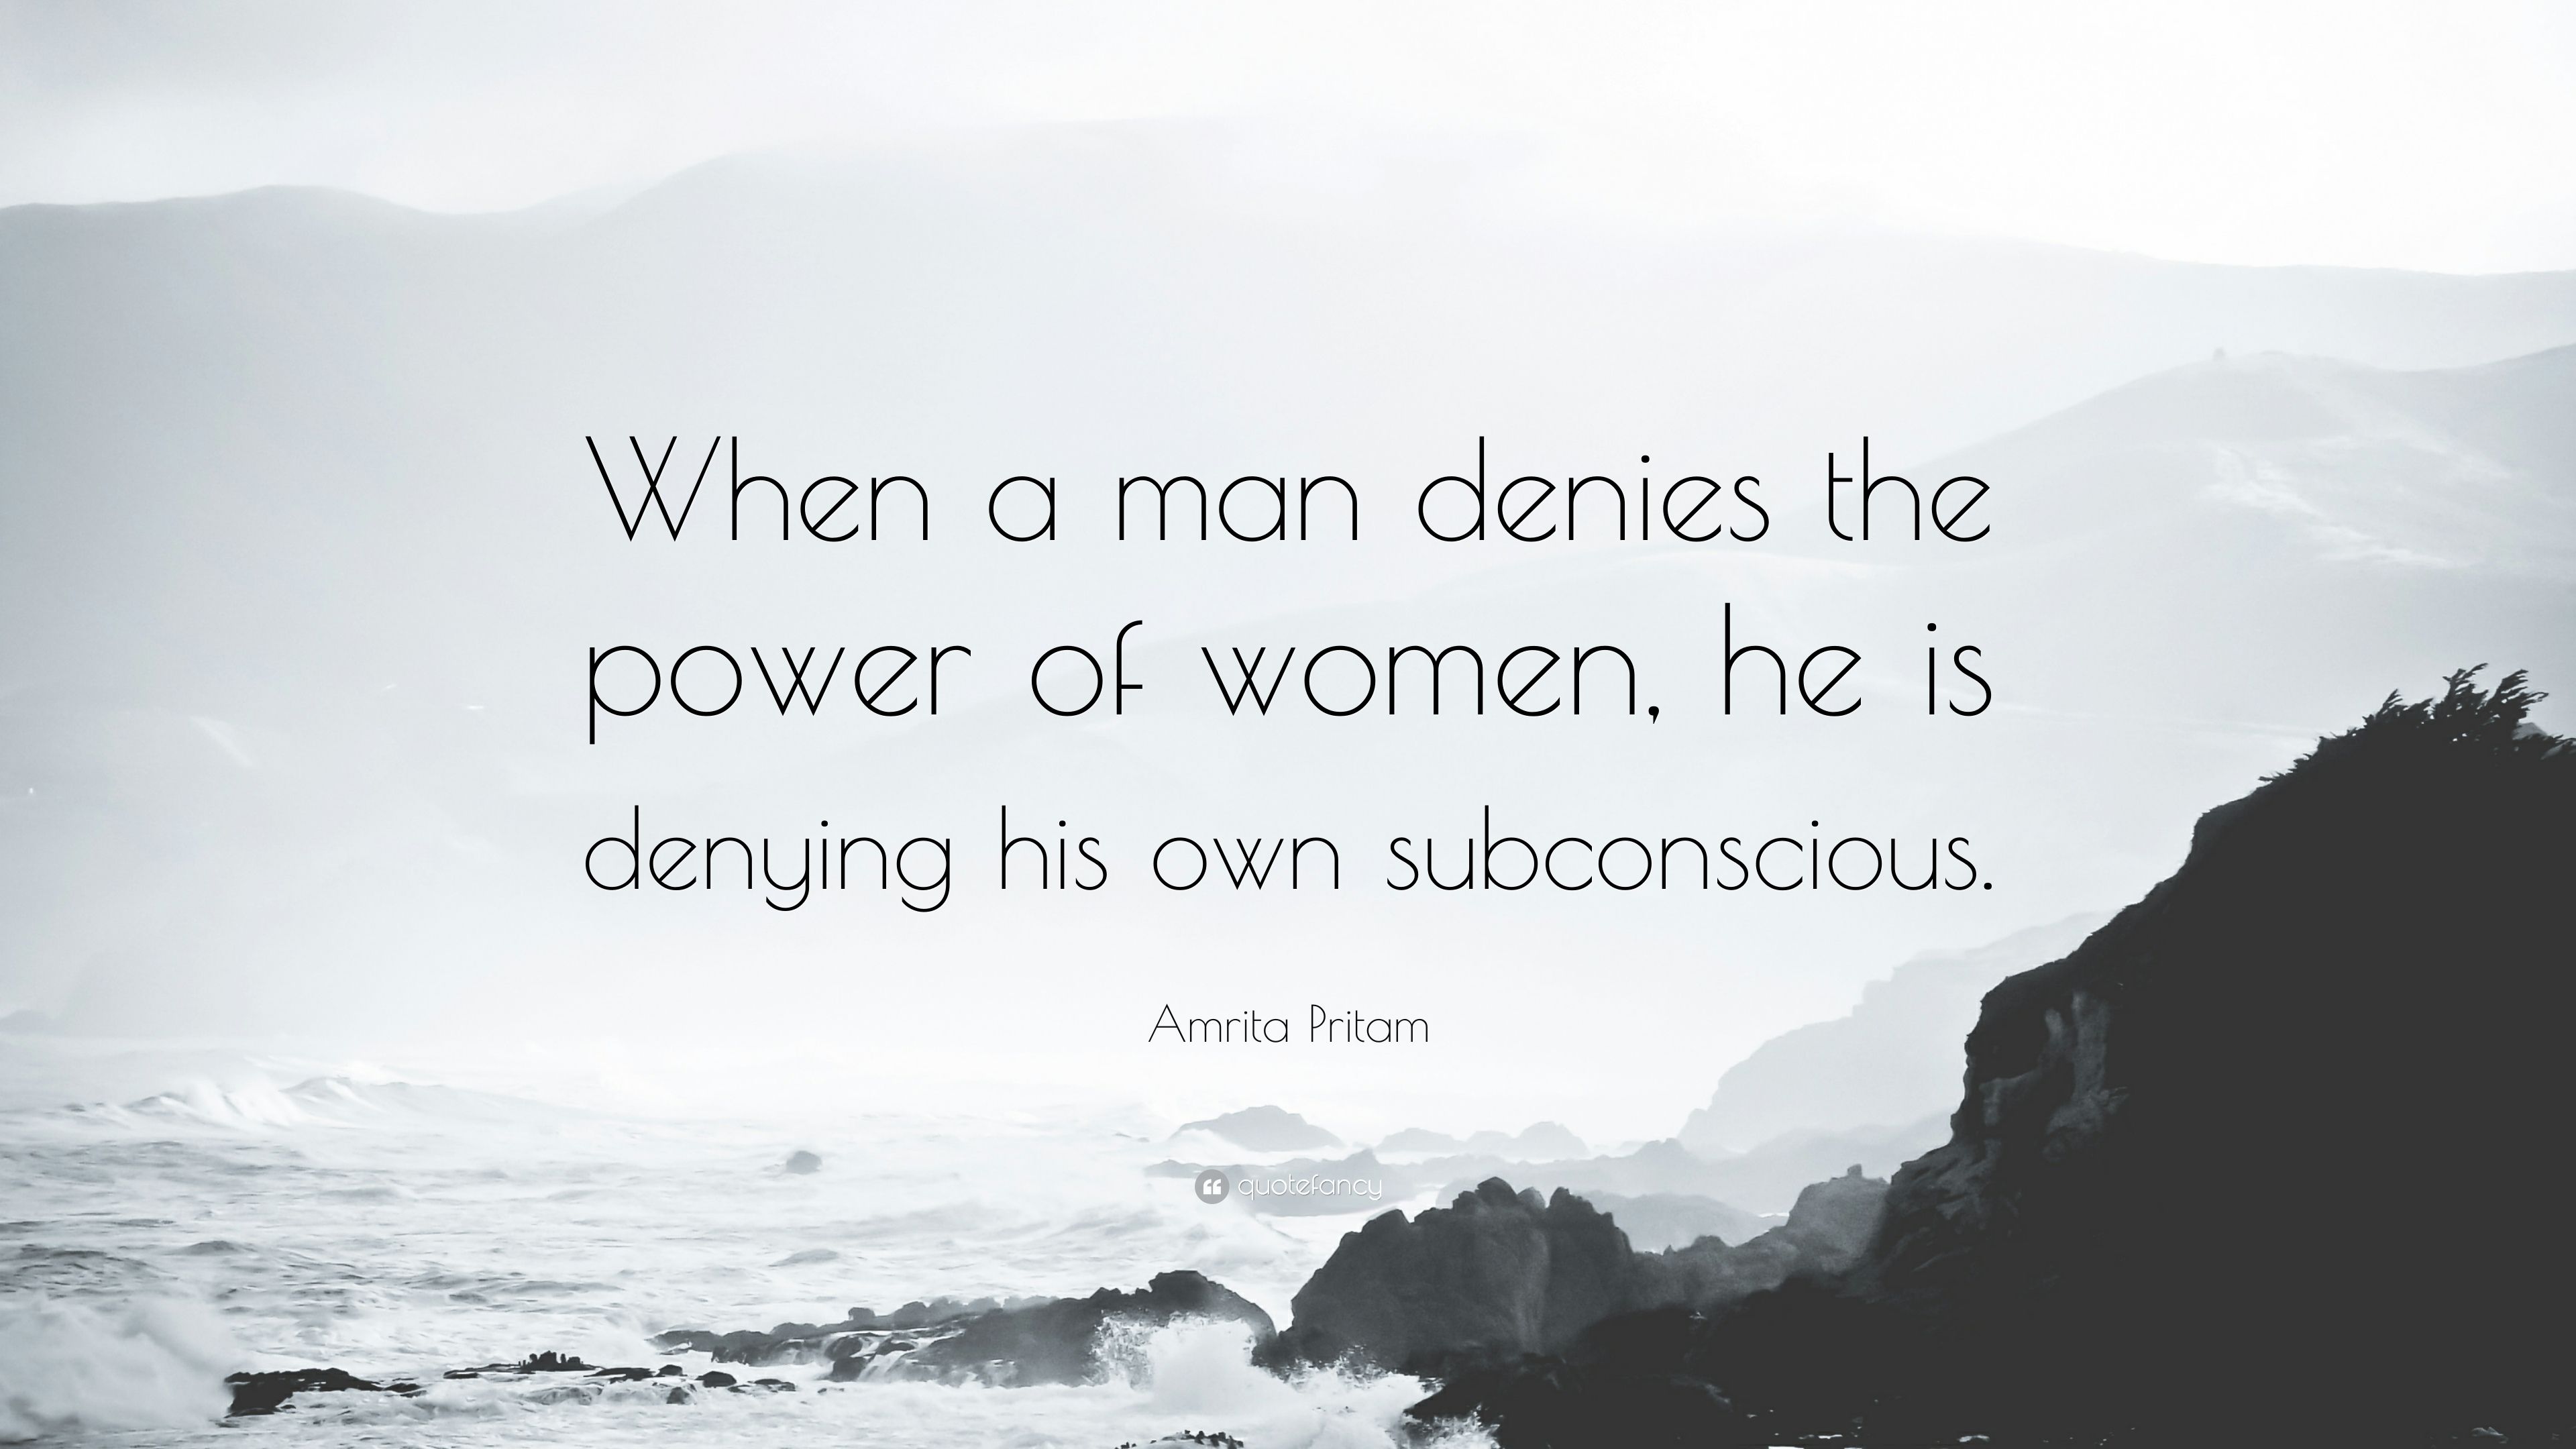 Amrita Pritam Quote: “When a man denies the power of women, he is